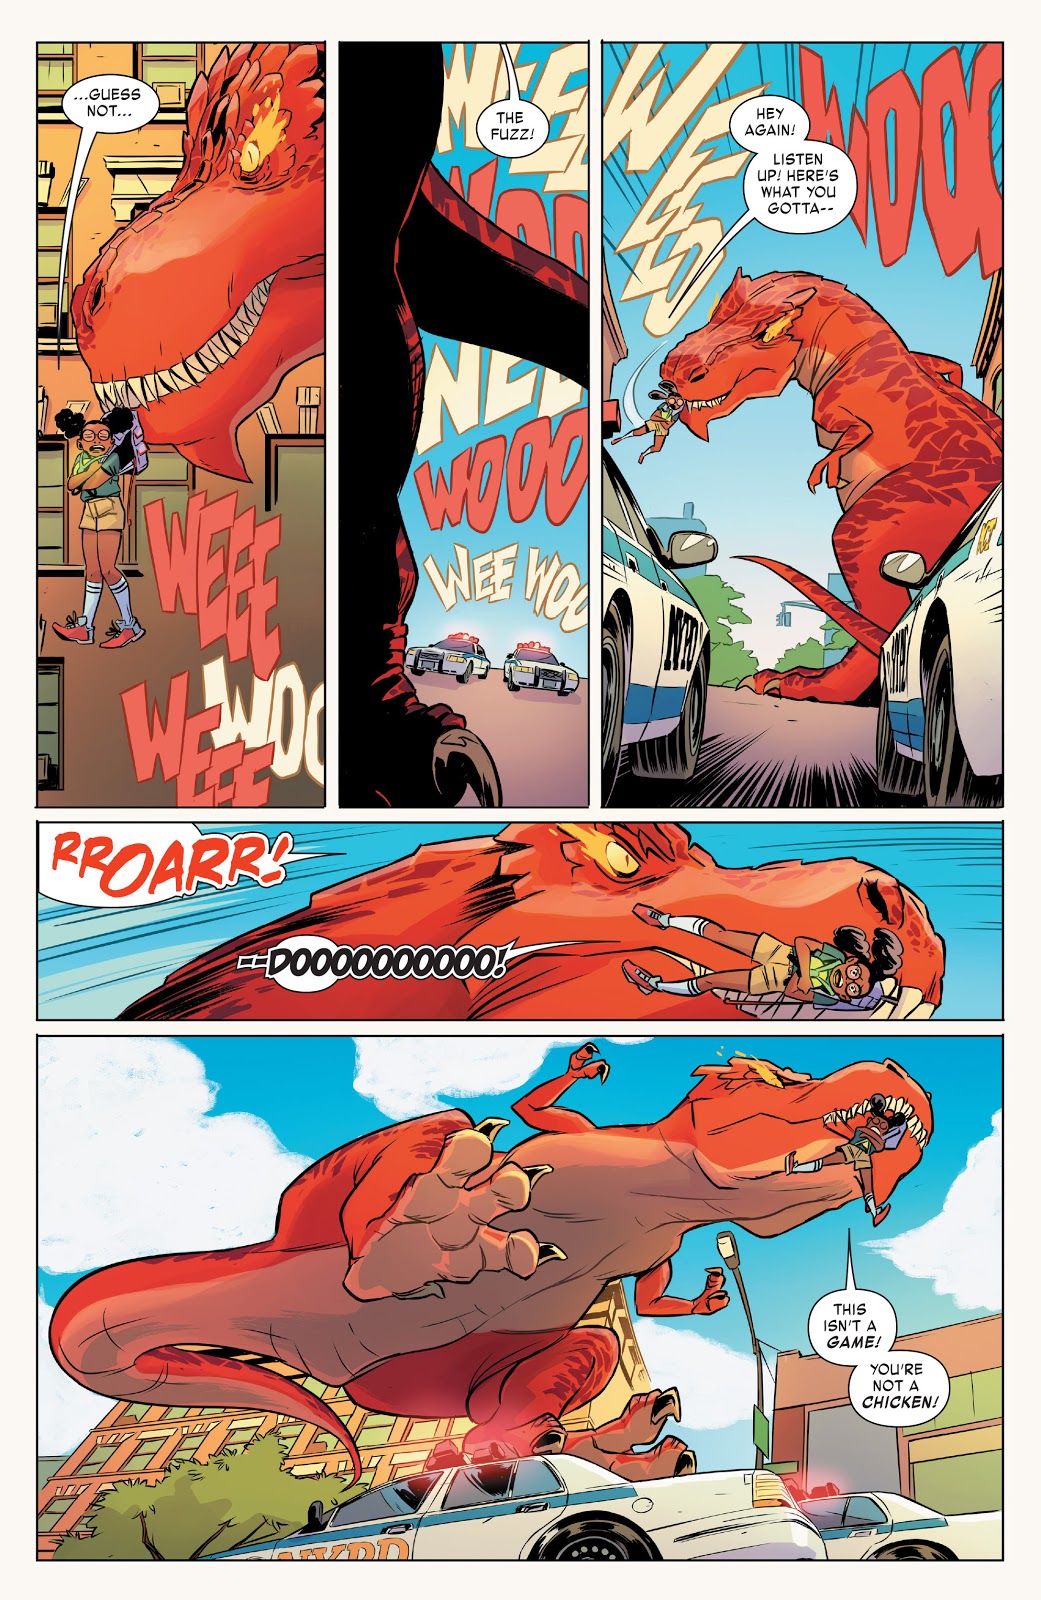 Moon Girl and Devil Dinosaur The Beginning review